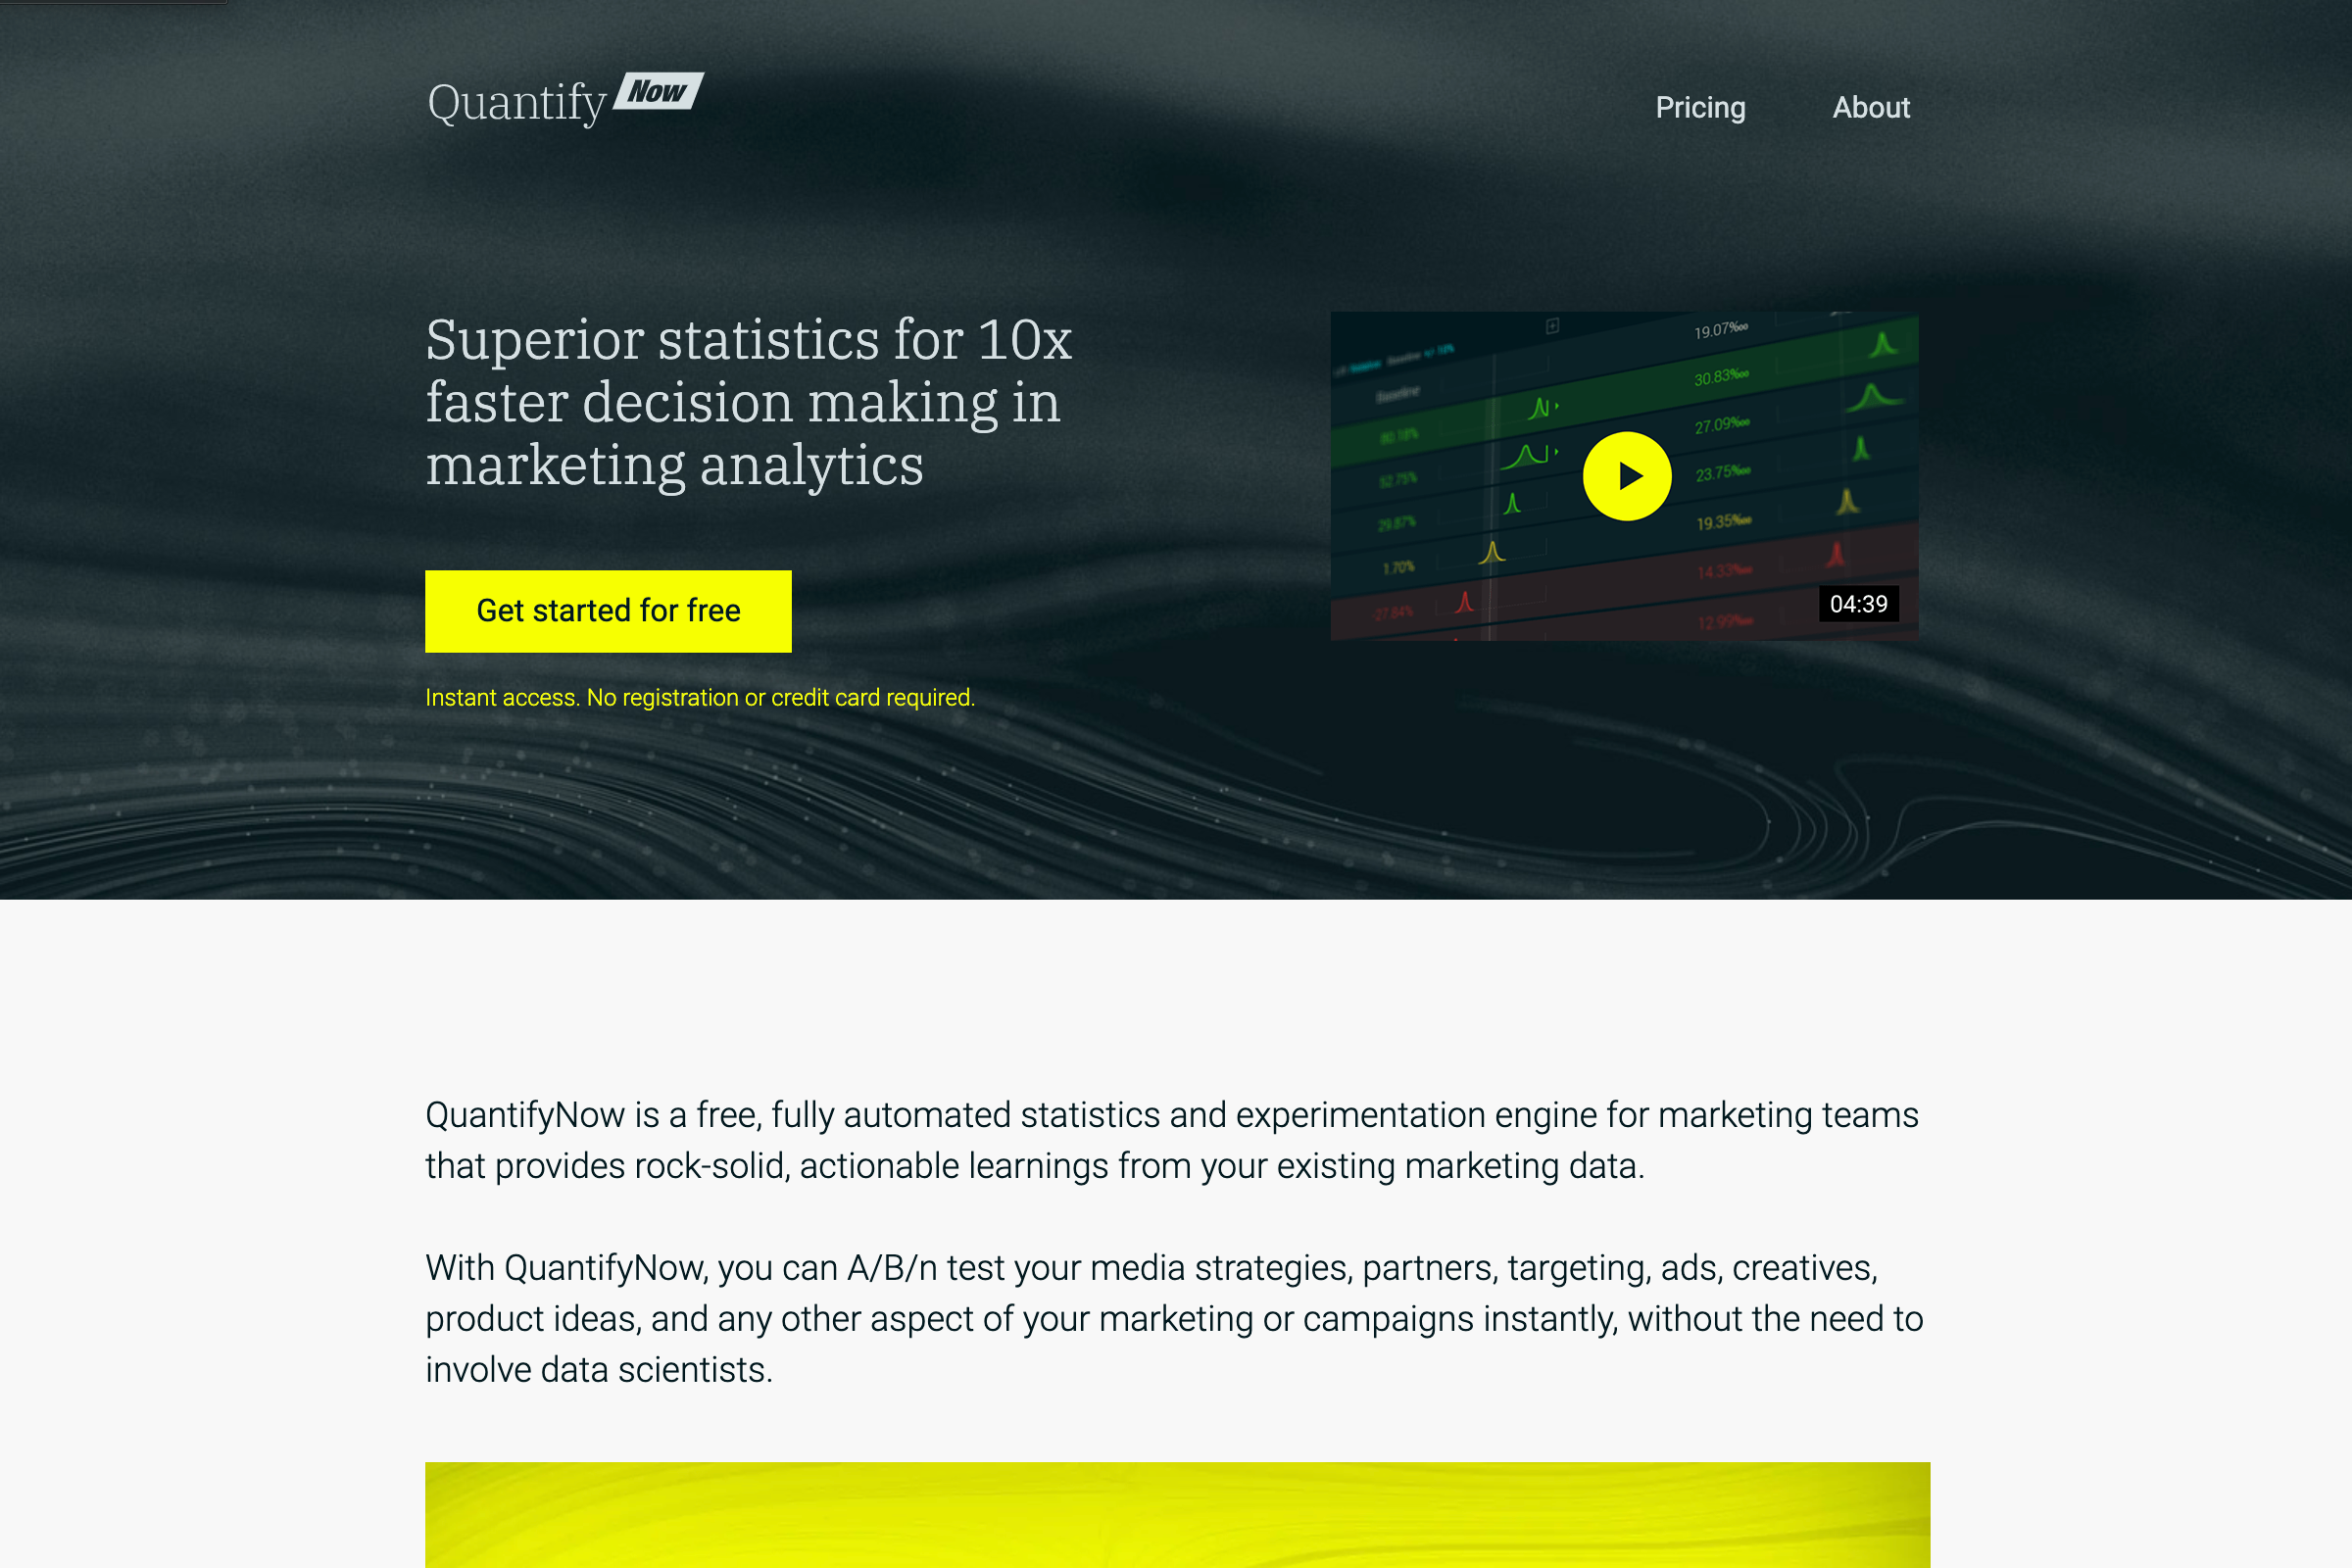 Find detailed information about QuantifyNow